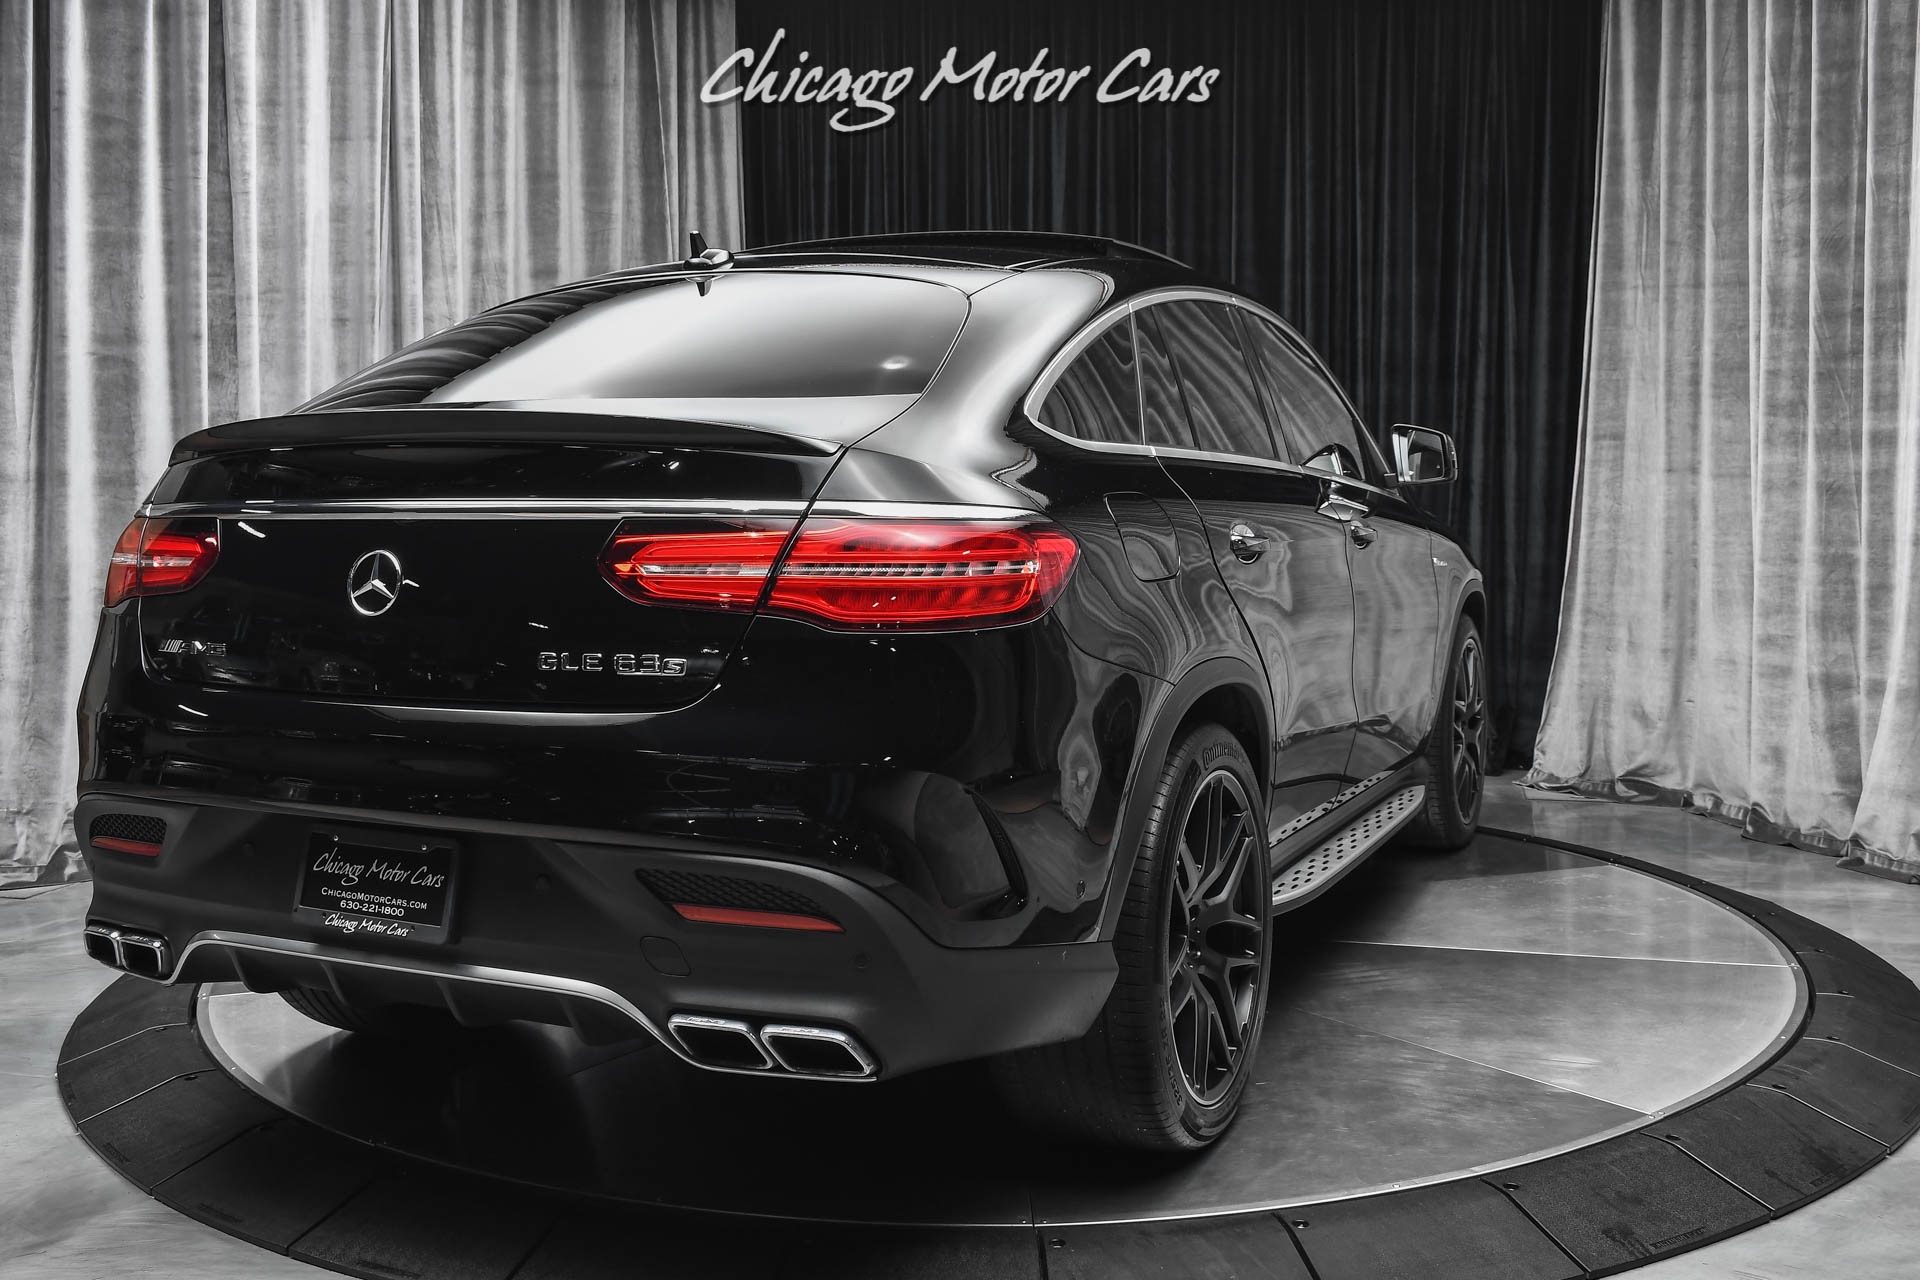 Used-2016-Mercedes-Benz-GLE-63-S-AMG-Coupe-Original-MSRP-124K-B-O-SOUND-SYSTEM-REAR-ENTERTAINMENT